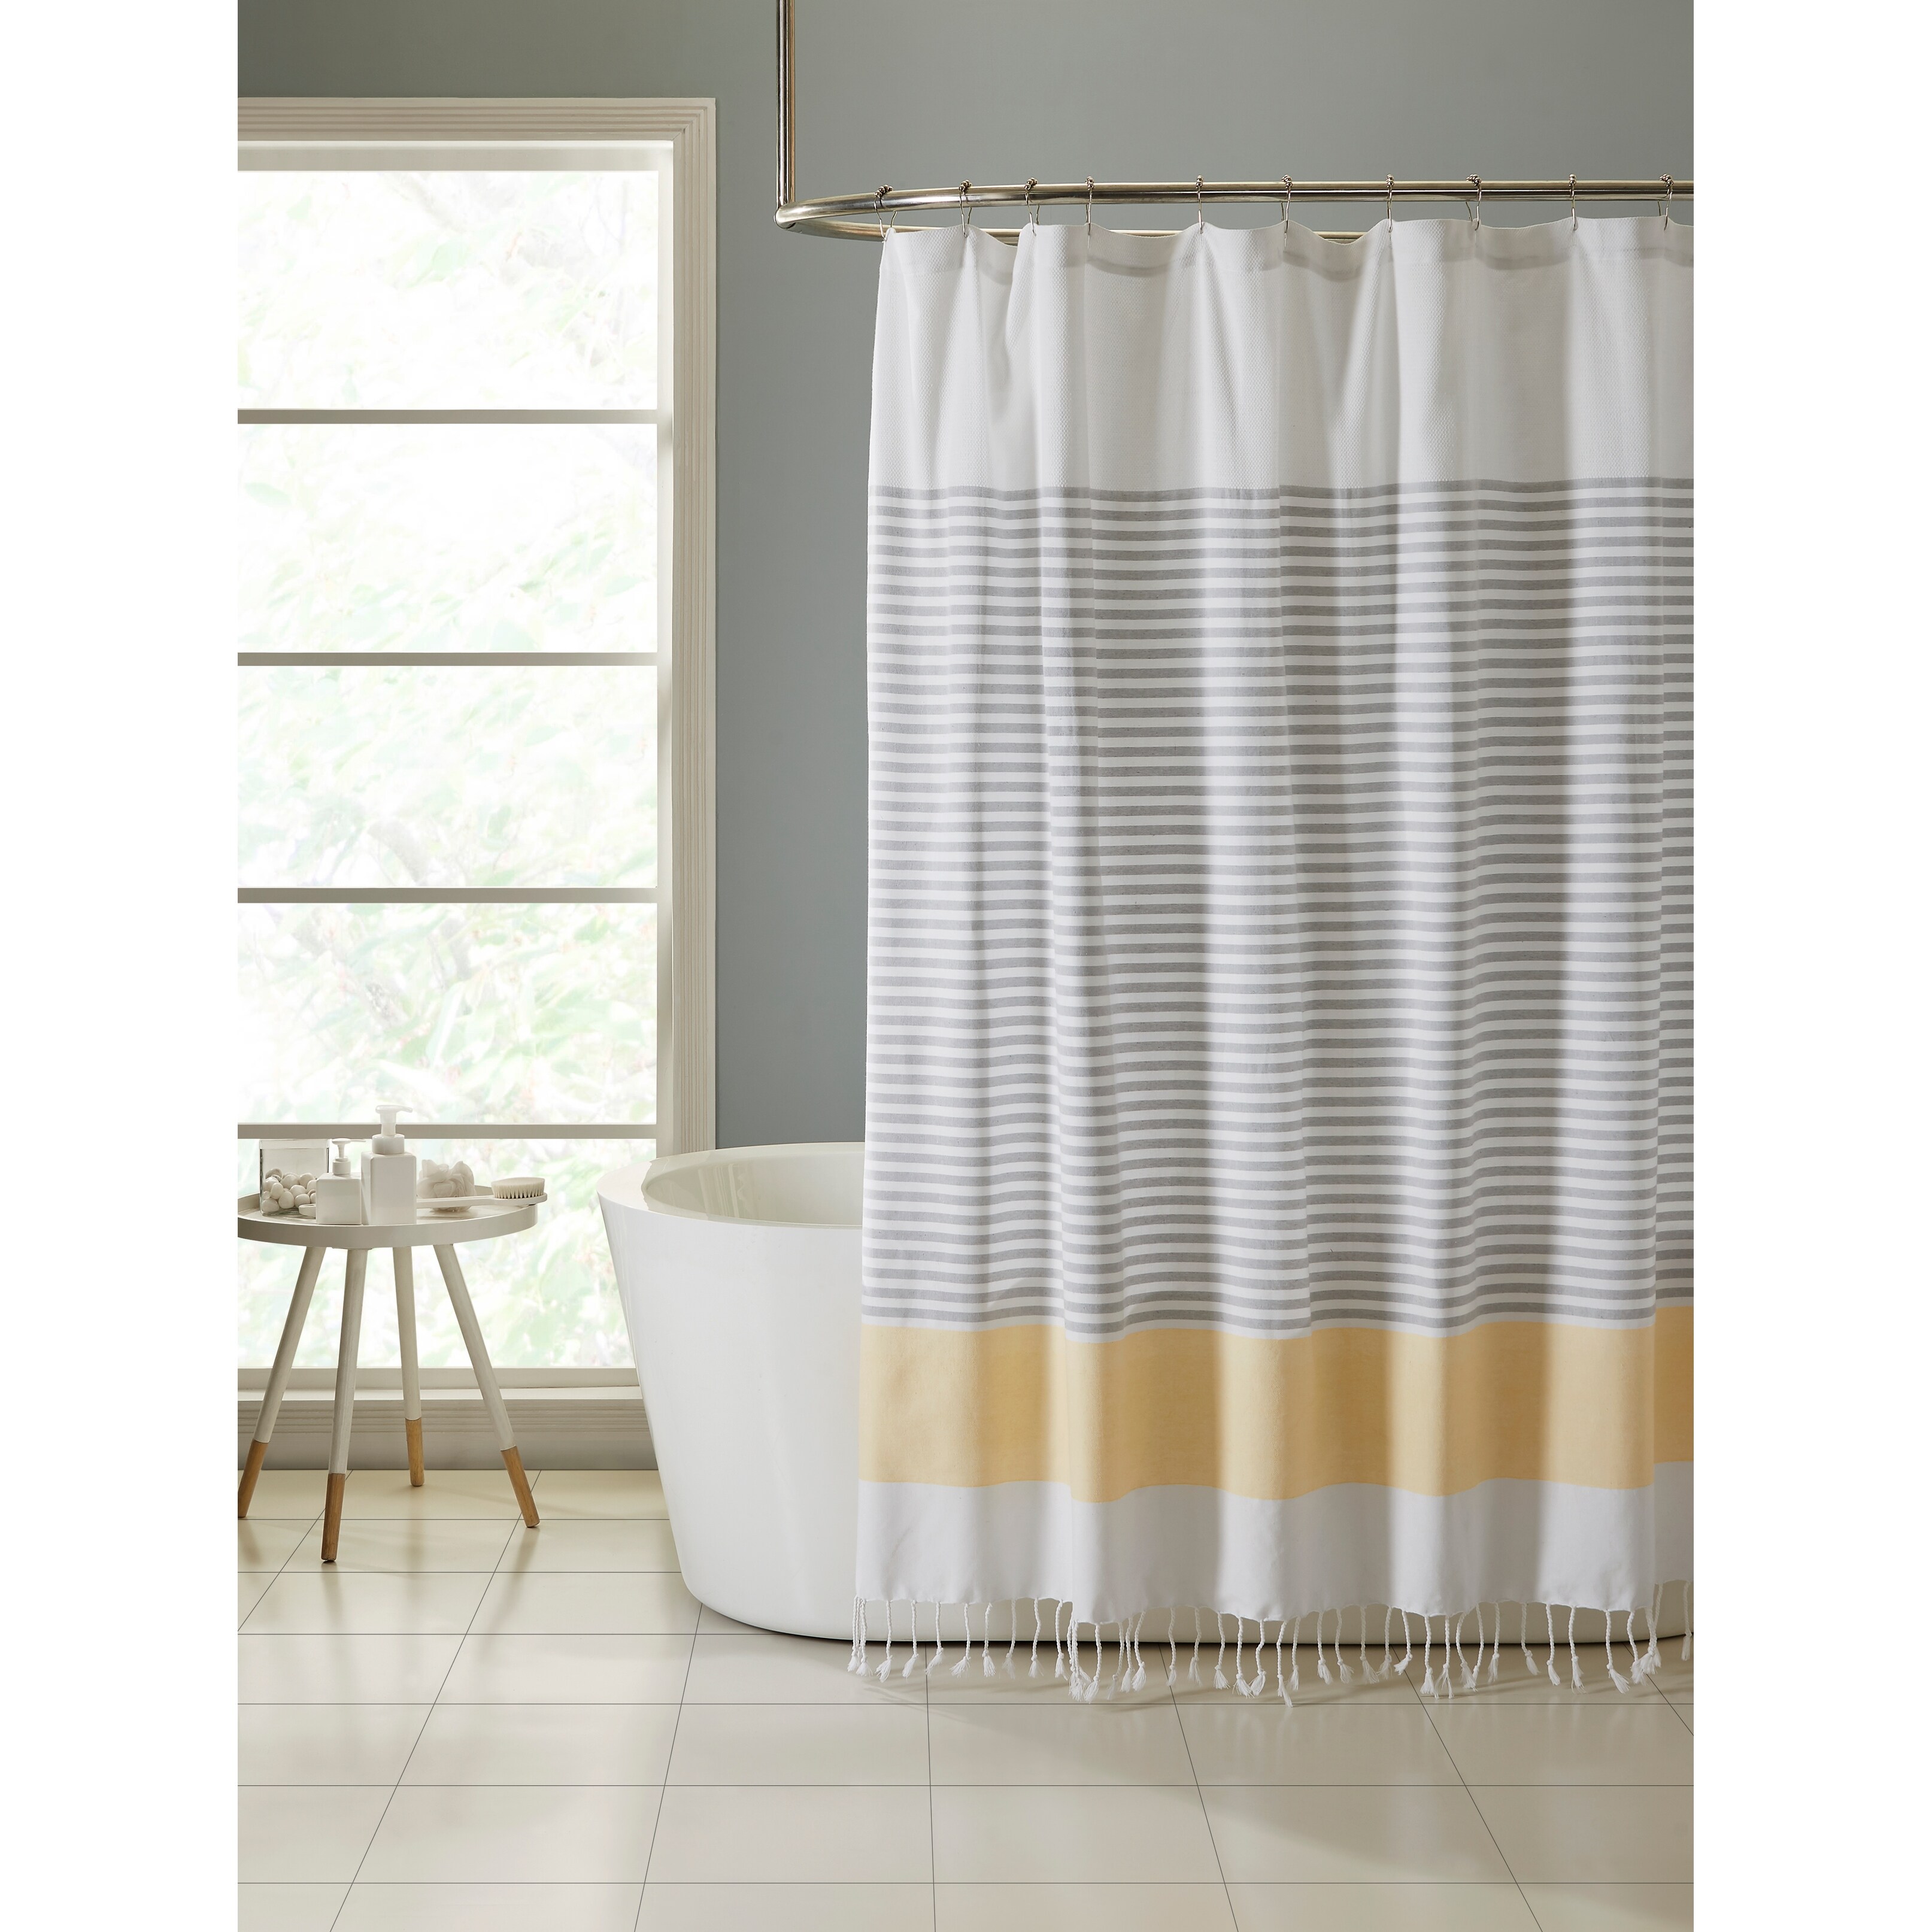 VCNY Home Universal Bathroom Fabric Shower Curtain Men or Women Muted Tones